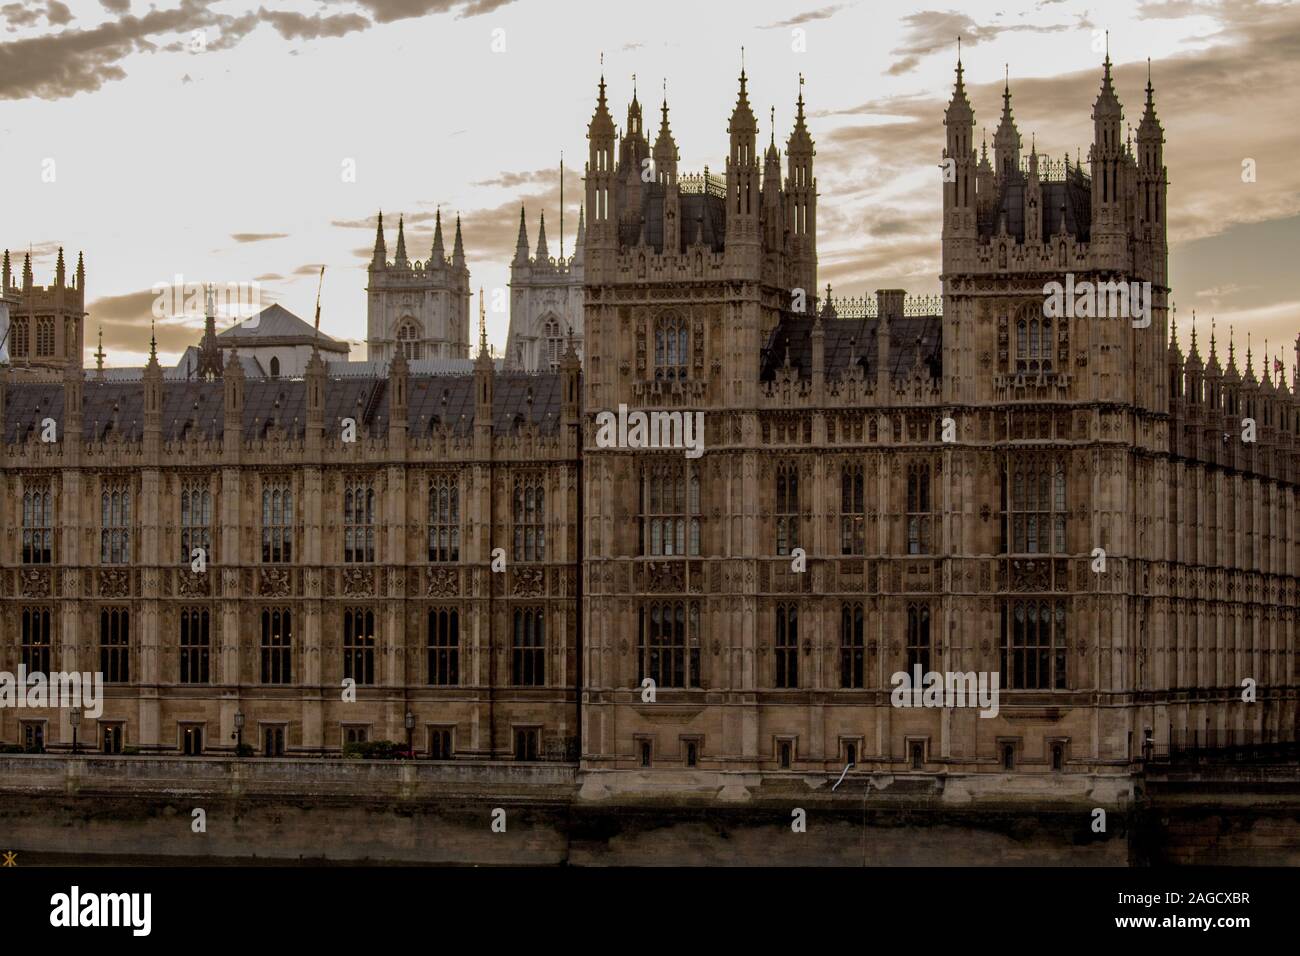 Palace of Westminster and the Houses of Parliament at dusk, London, England Stock Photo